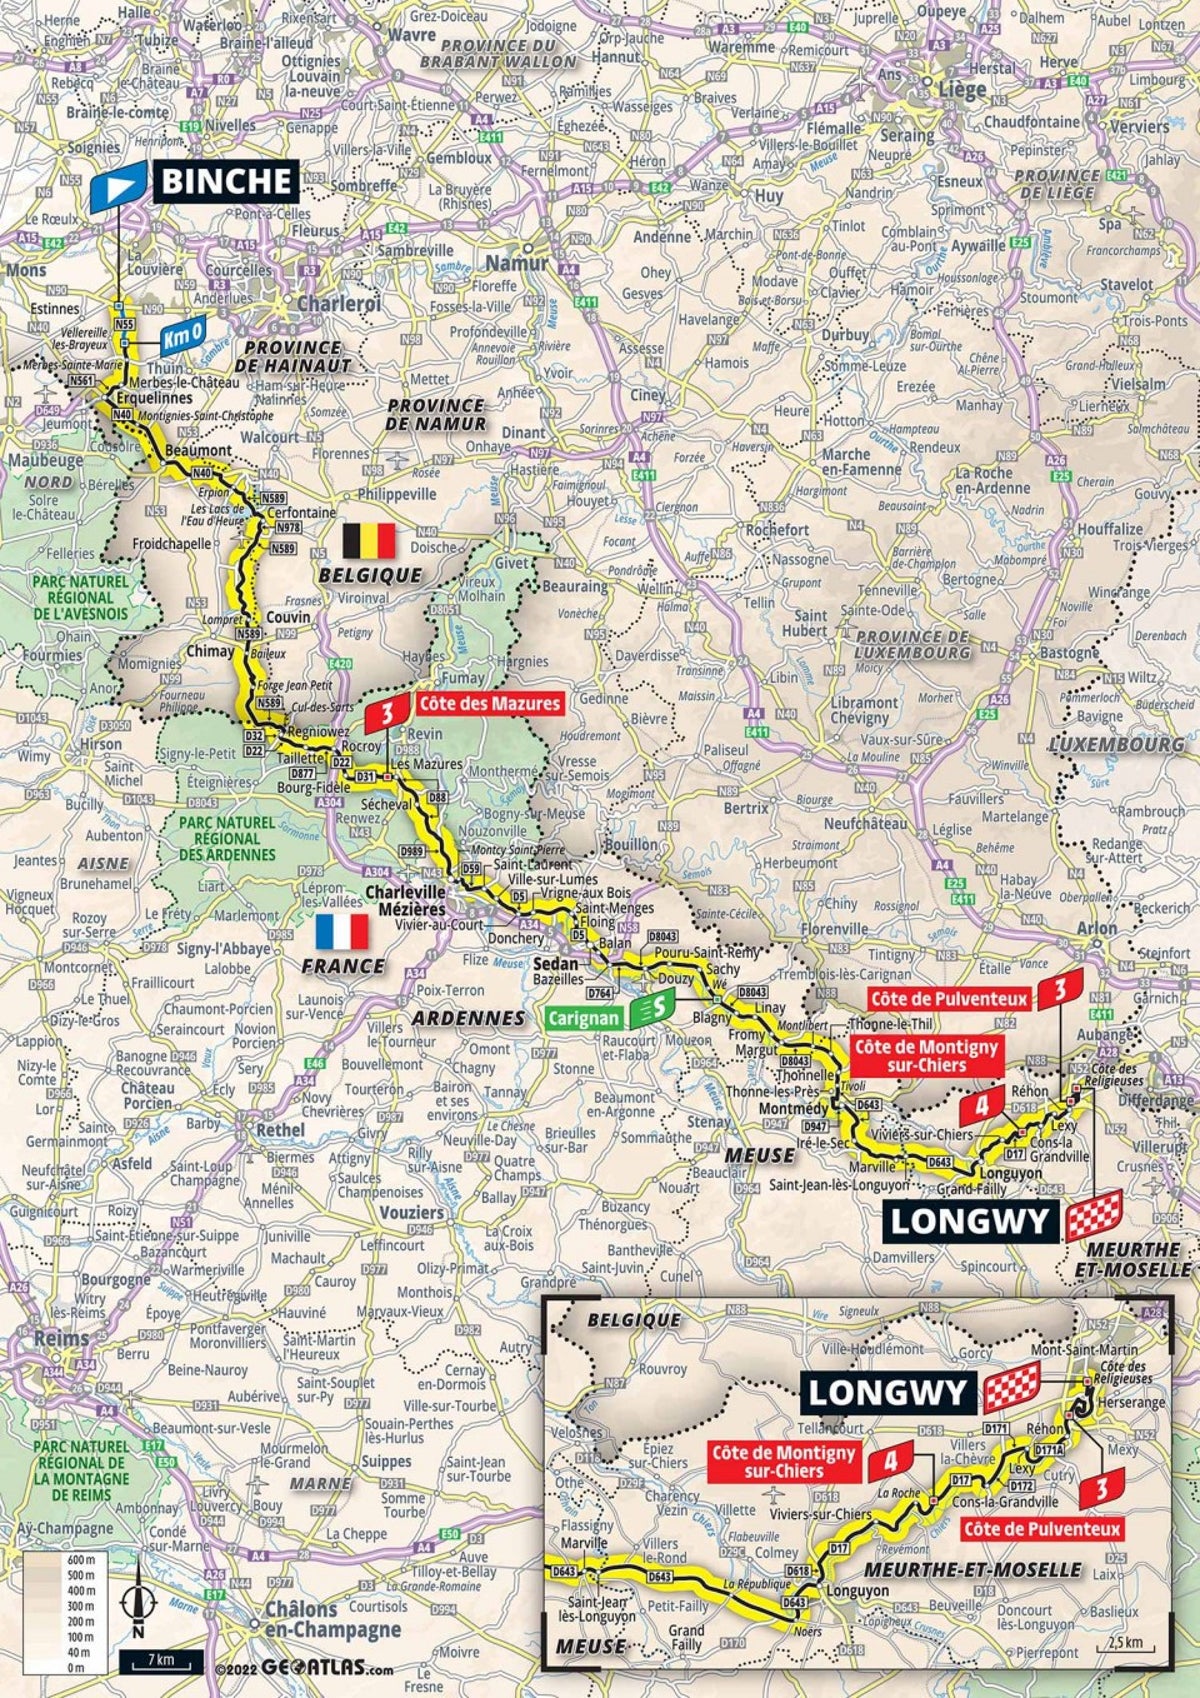 Tour de France stage 6 preview: Route map and profile of 220km route from Binche to Longwy today